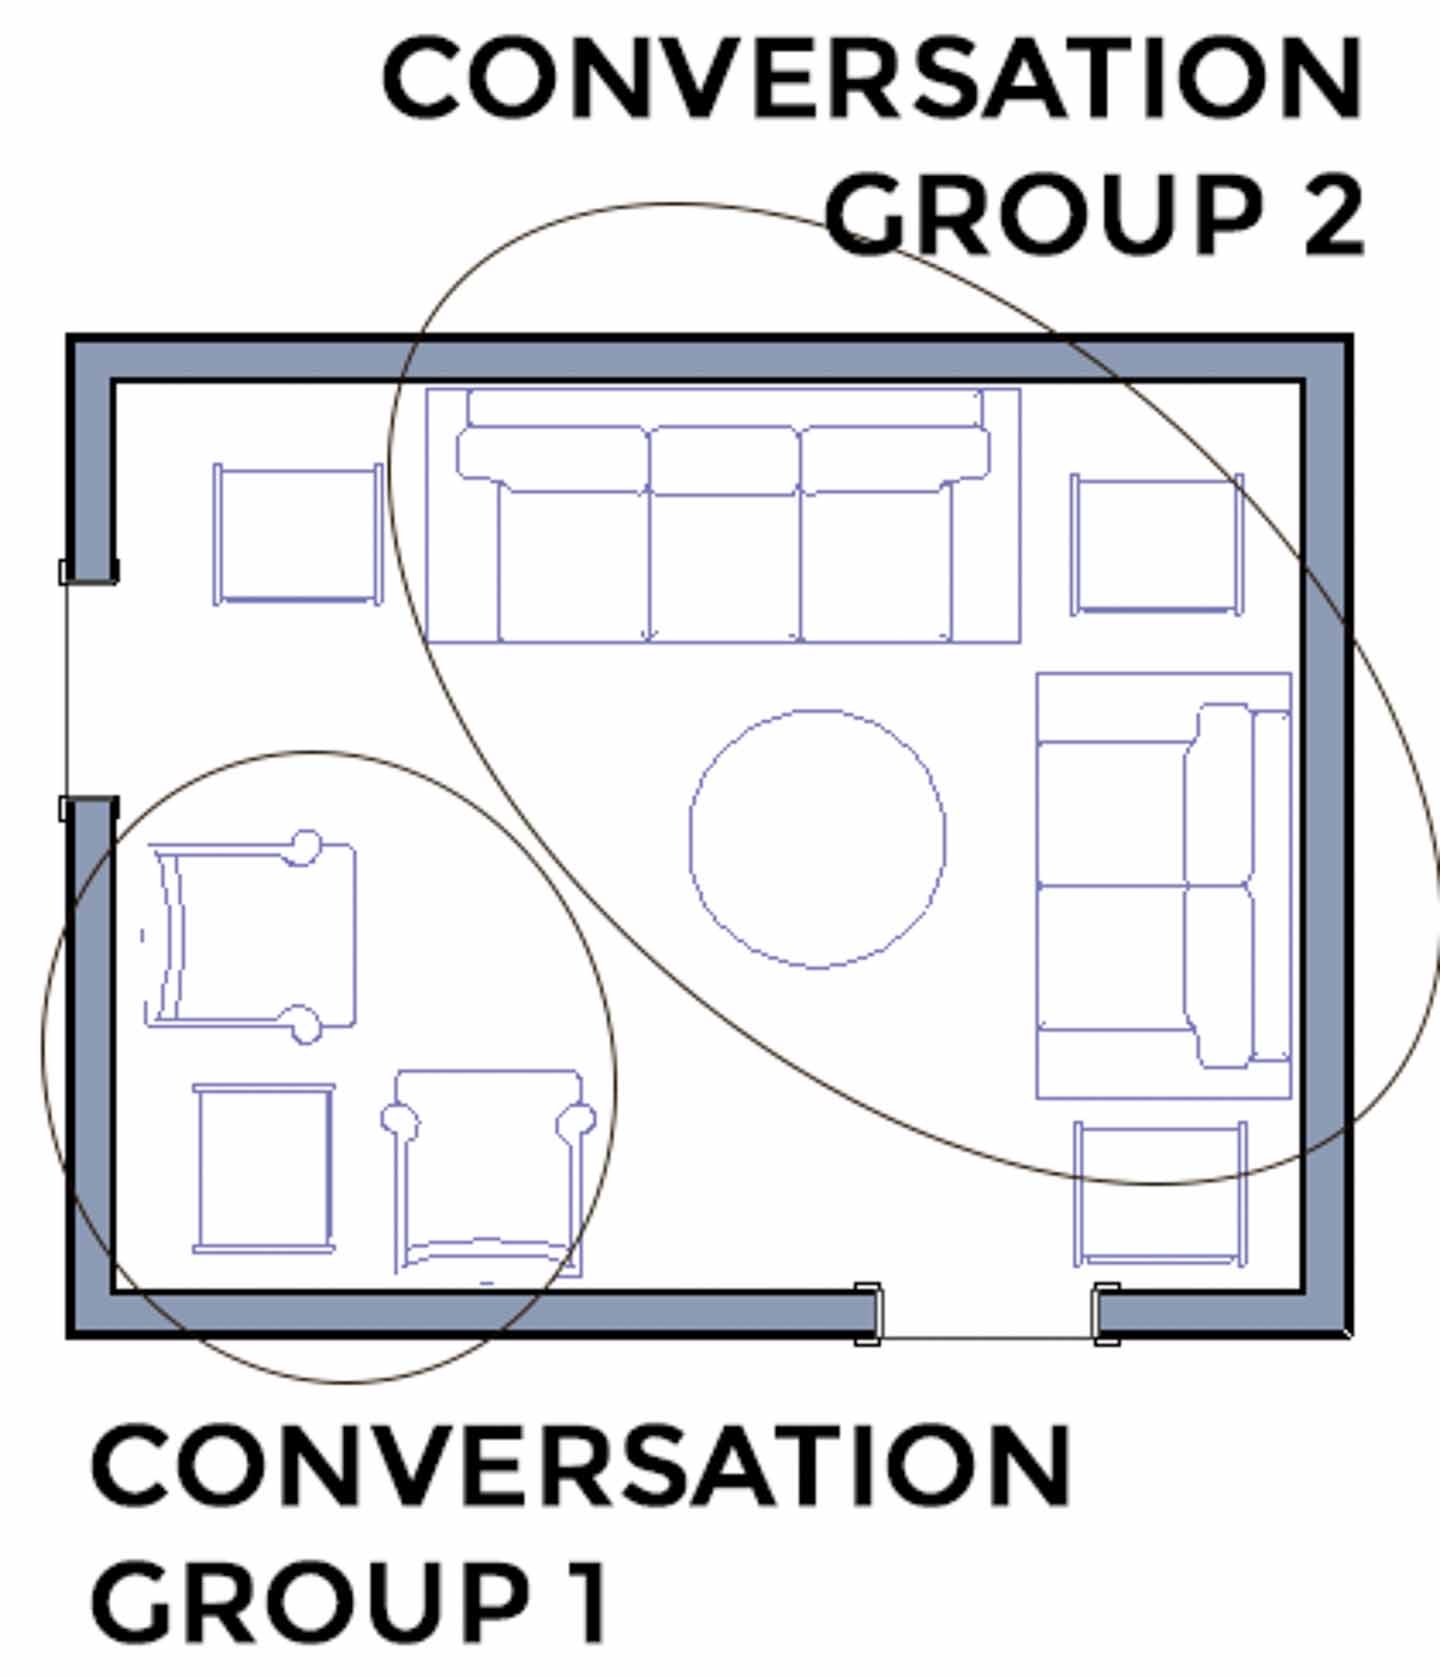 Living room layout with 2 conversation groups